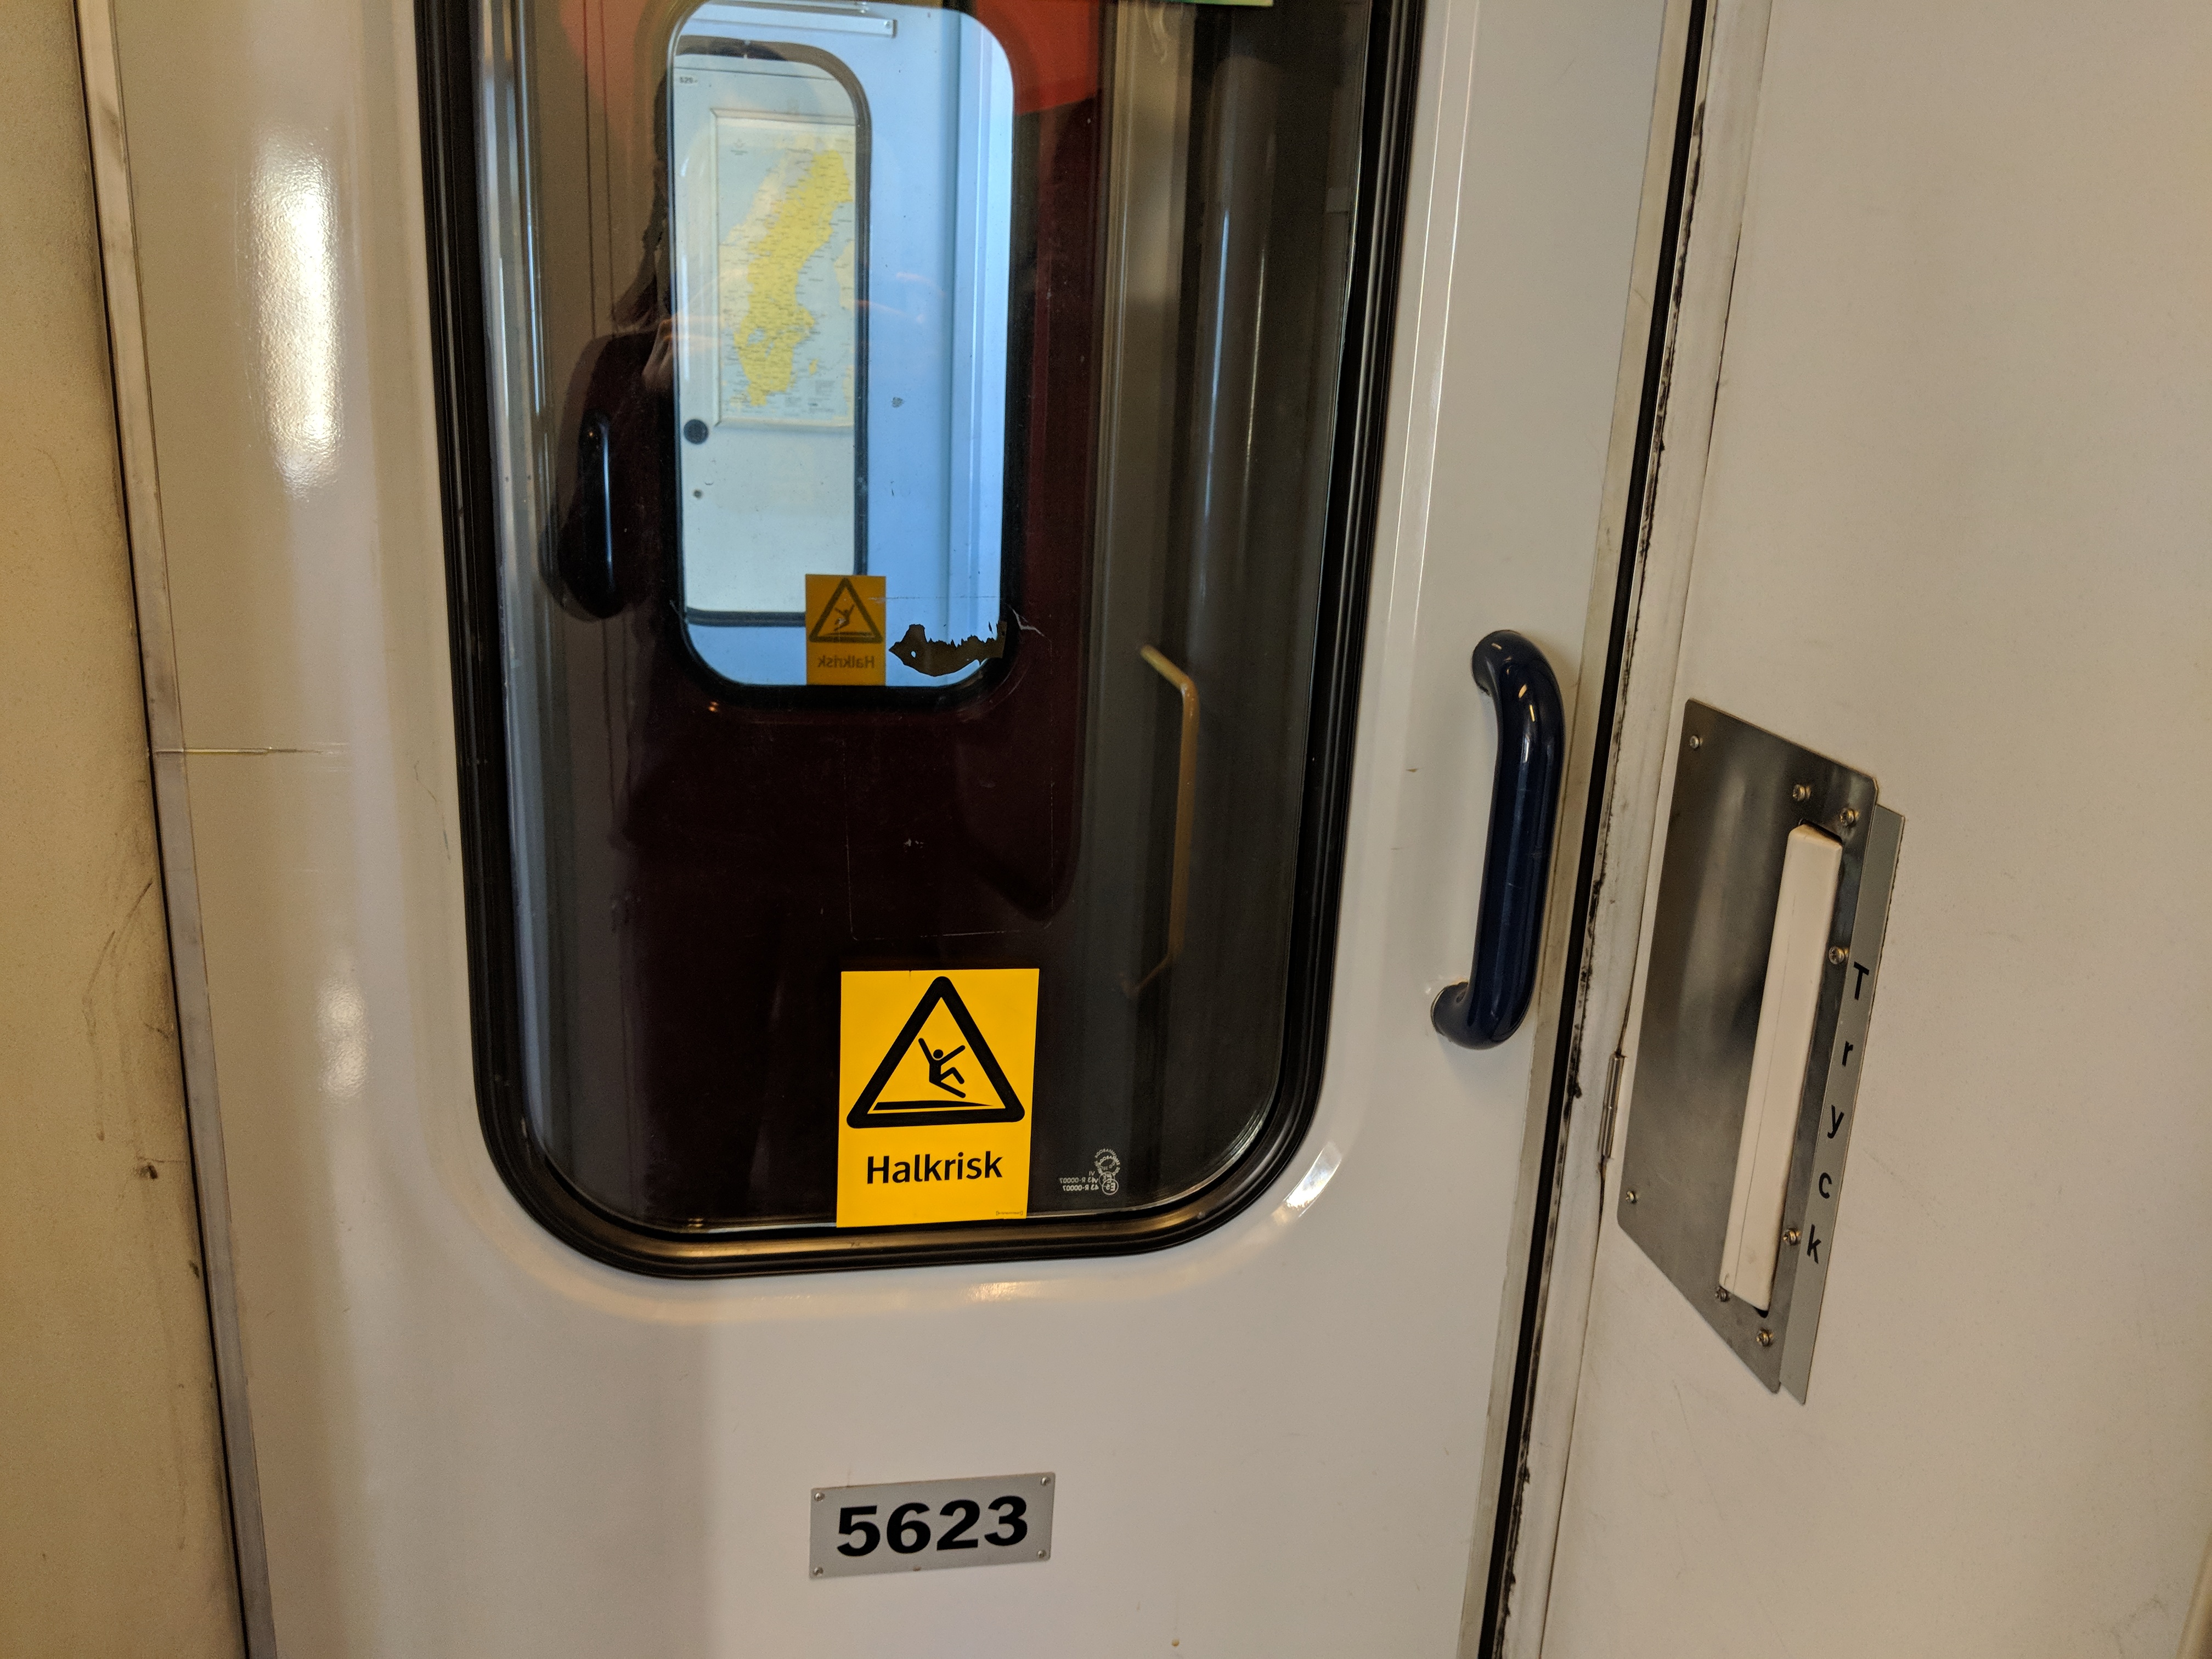 Instead of hauling the doors open using your entire body weight (like we did), press the little white bar on the right, labelled 'Tryck' and it'll open automatically.